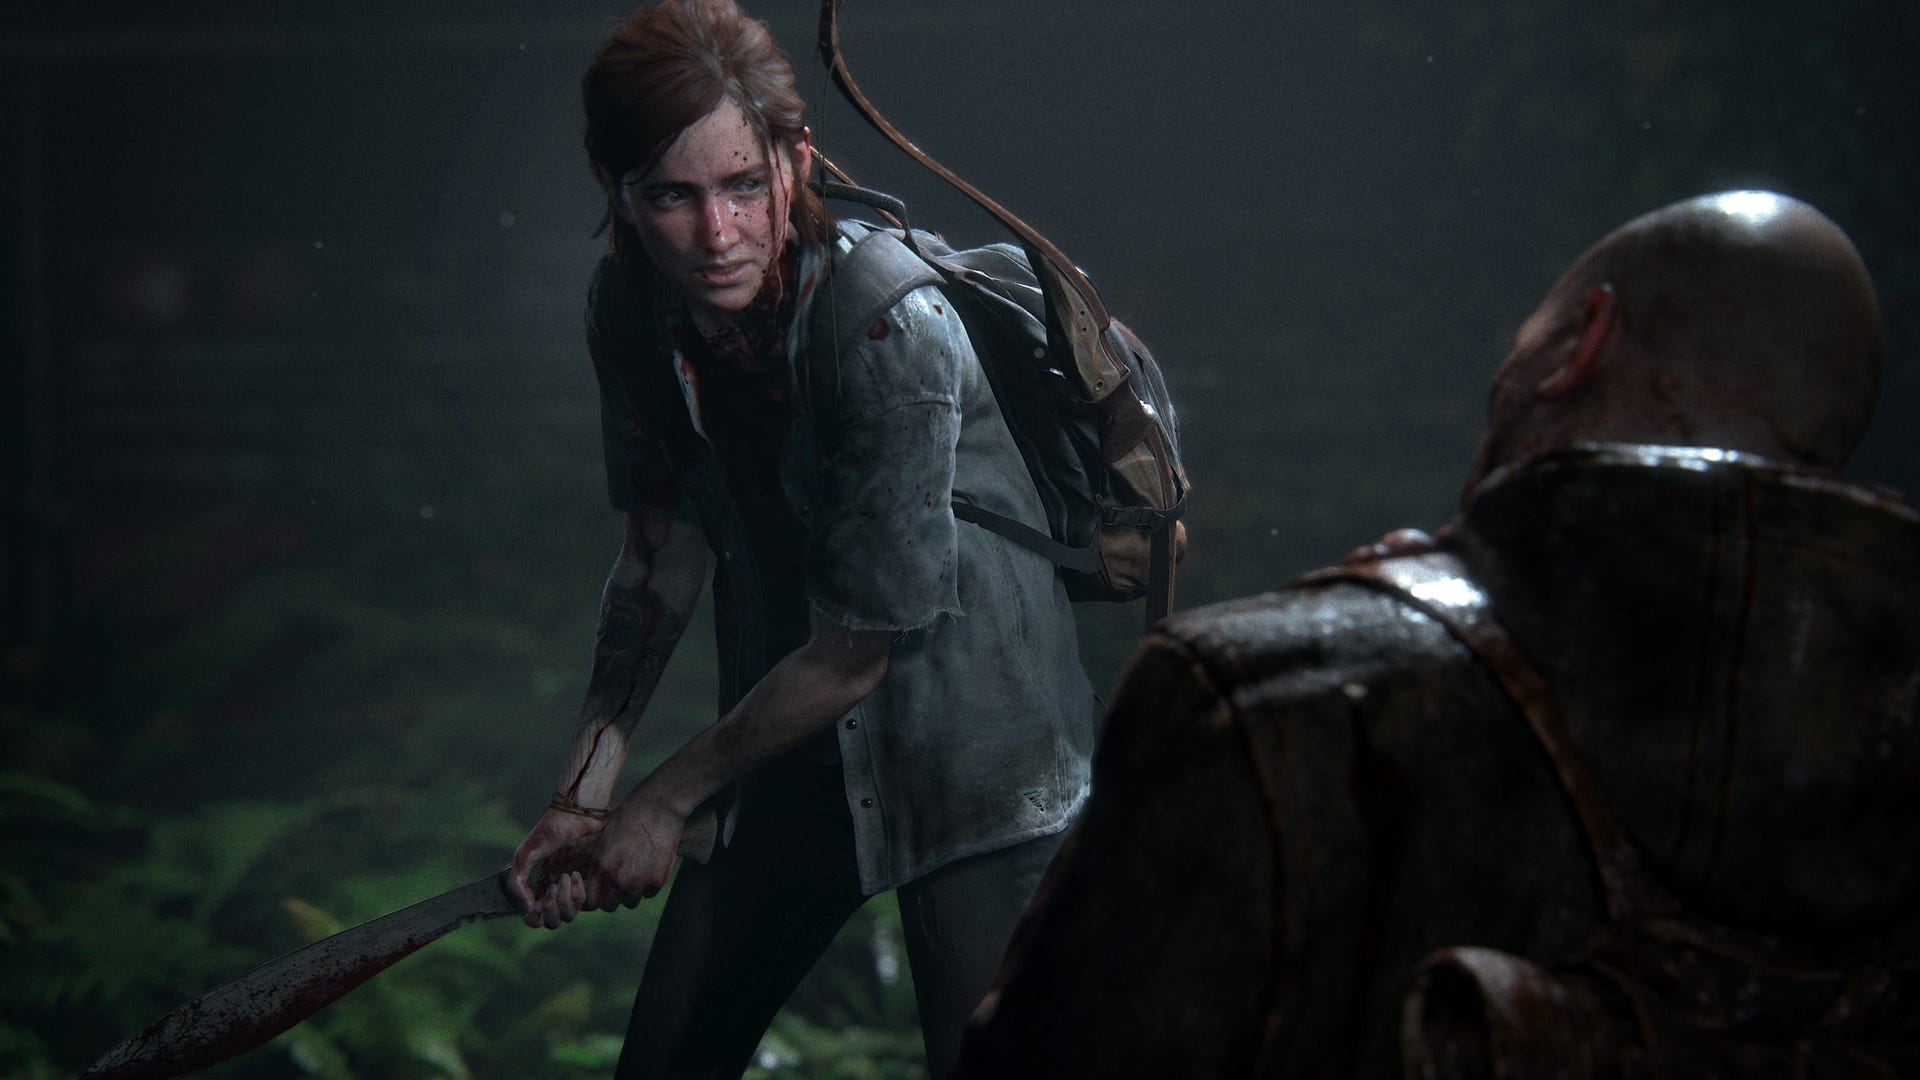 Part 2: Recreating “Last Of Us” in Unreal Engine 🎮 | by Dinuka Jay | Medium